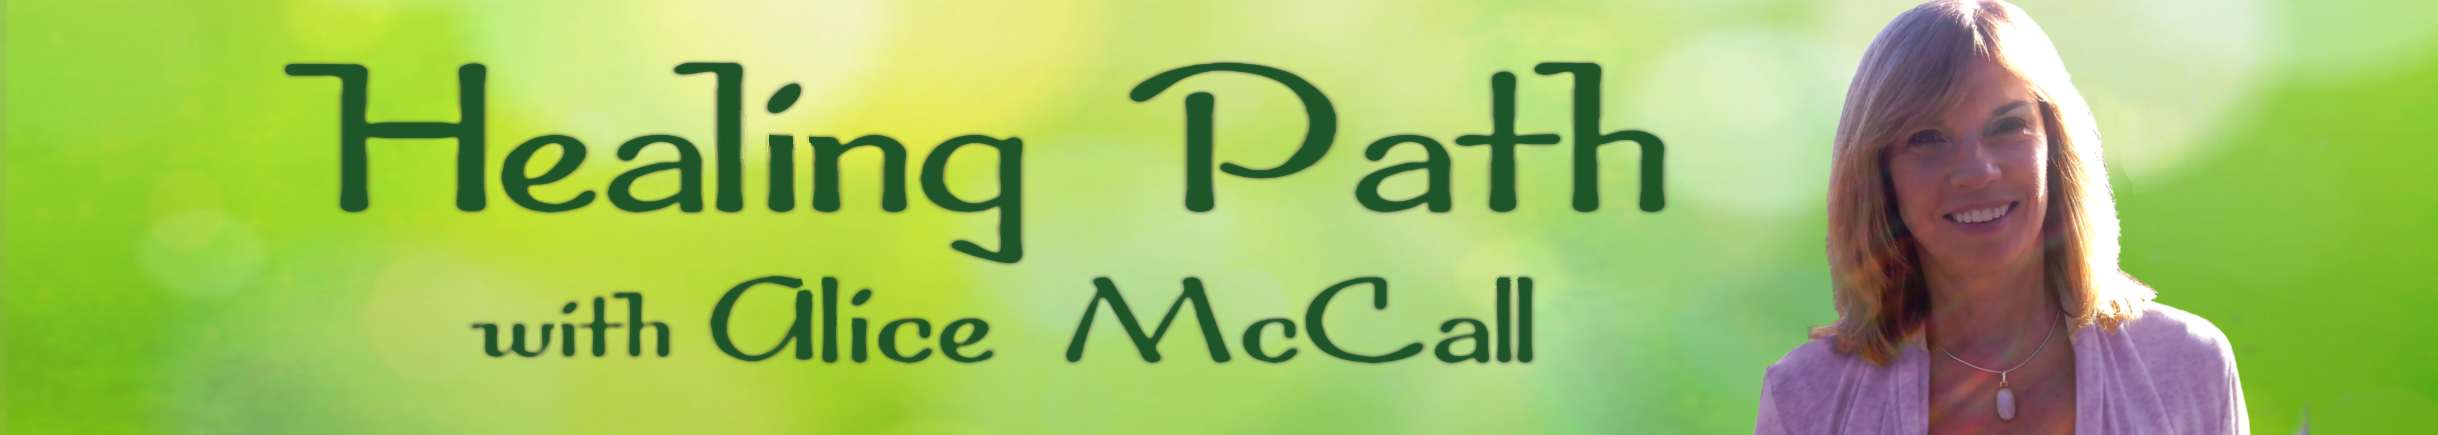 Healing Path with Alice McCall